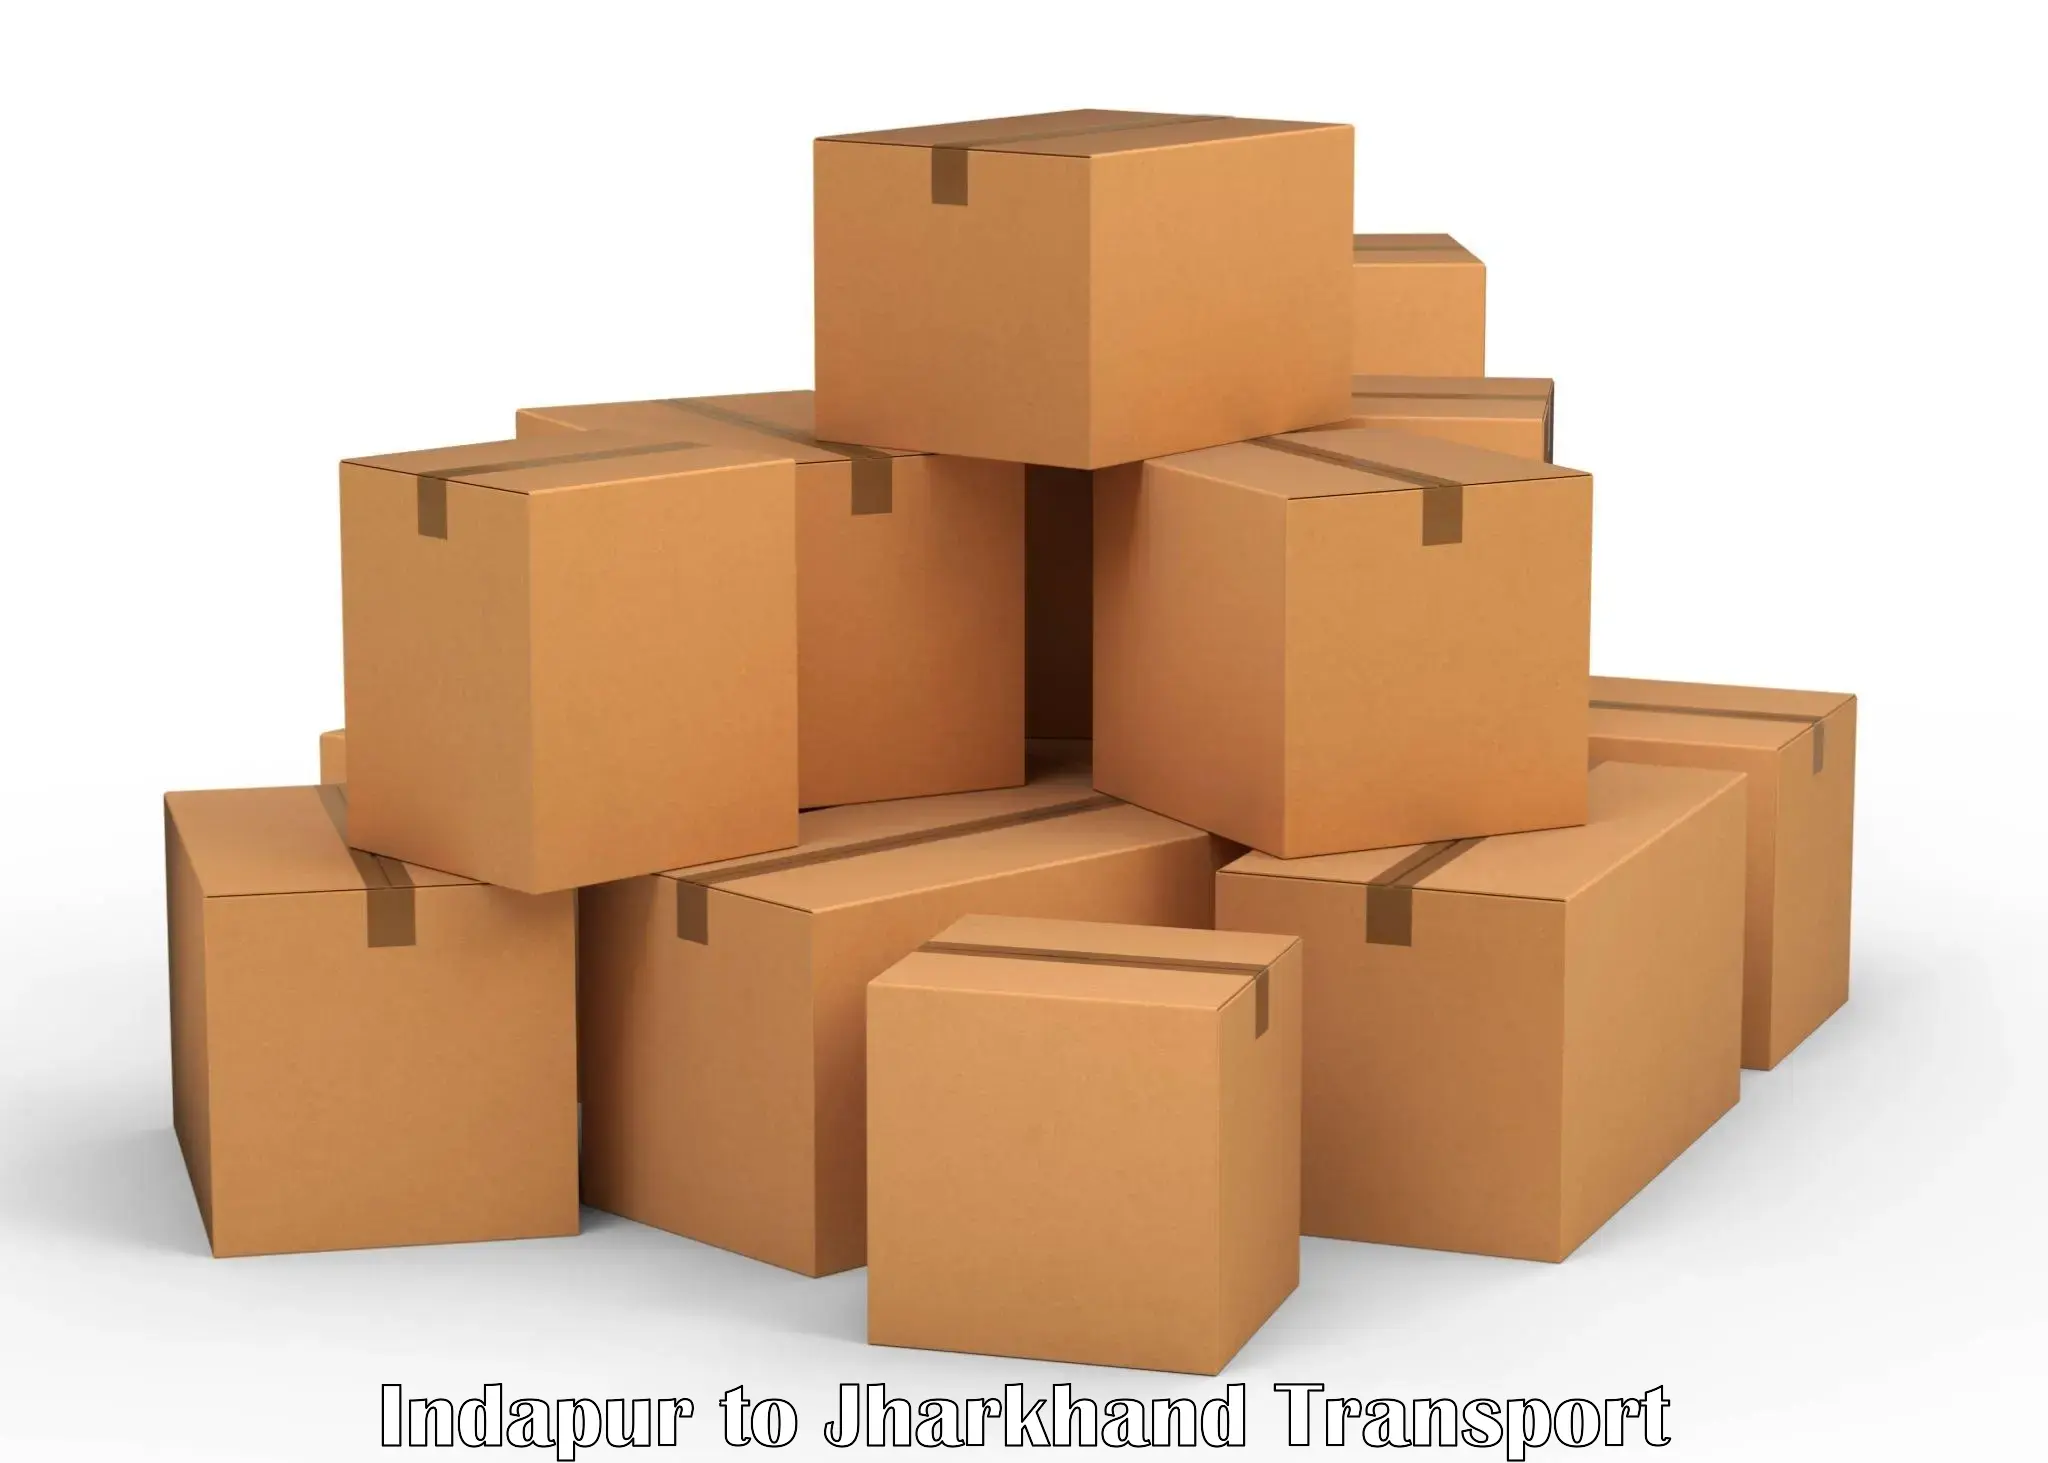 Shipping partner Indapur to Jharkhand